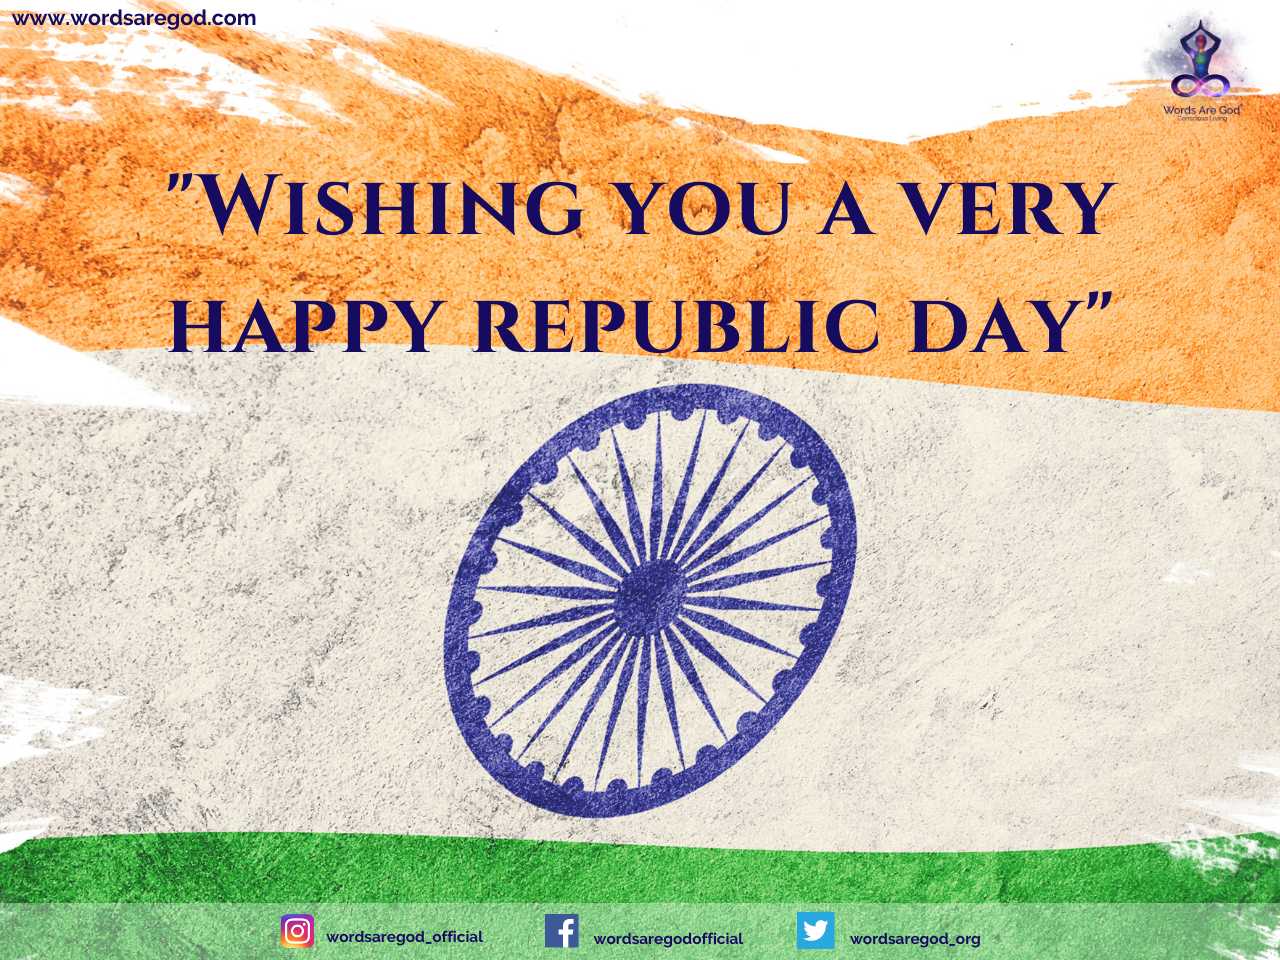 Top Republic Day Wishes. Words Are God